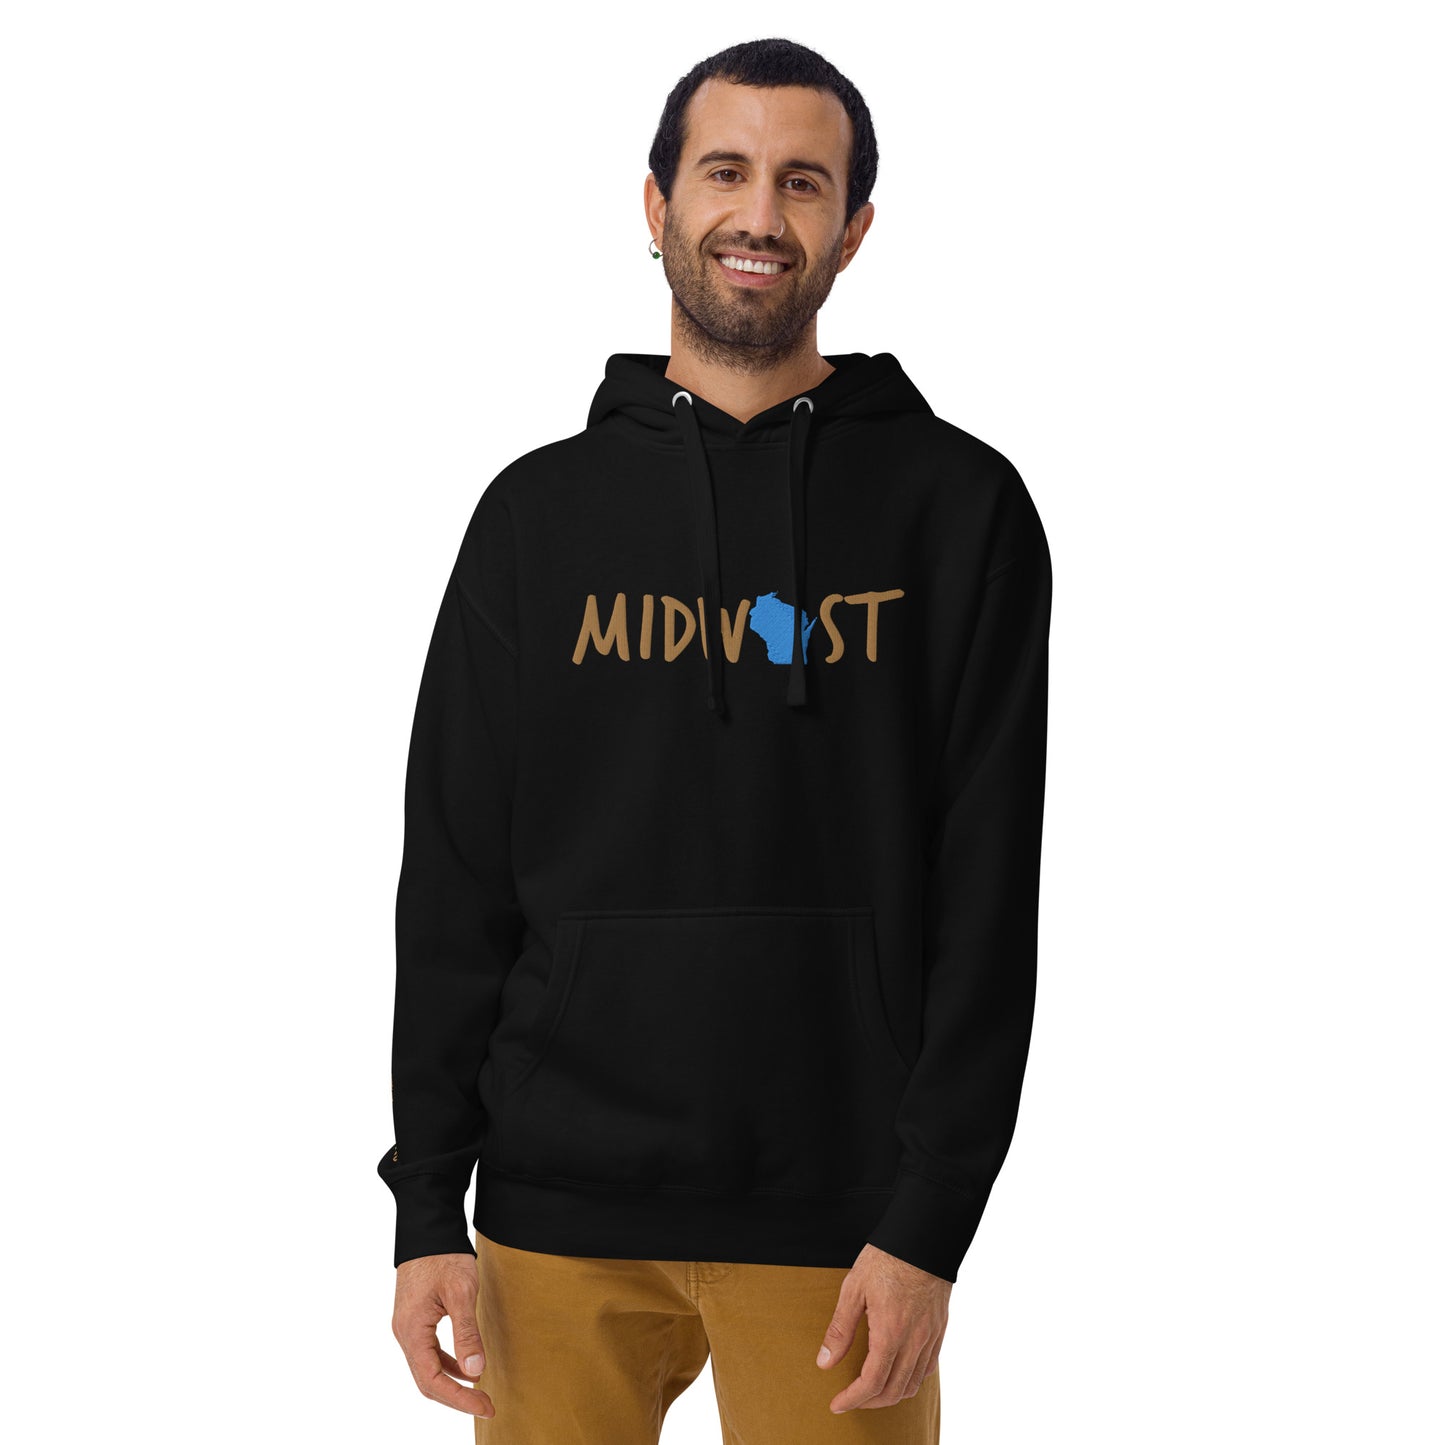 Wisconsin Midwest 'Love This' Embroidered Unisex Hoodie